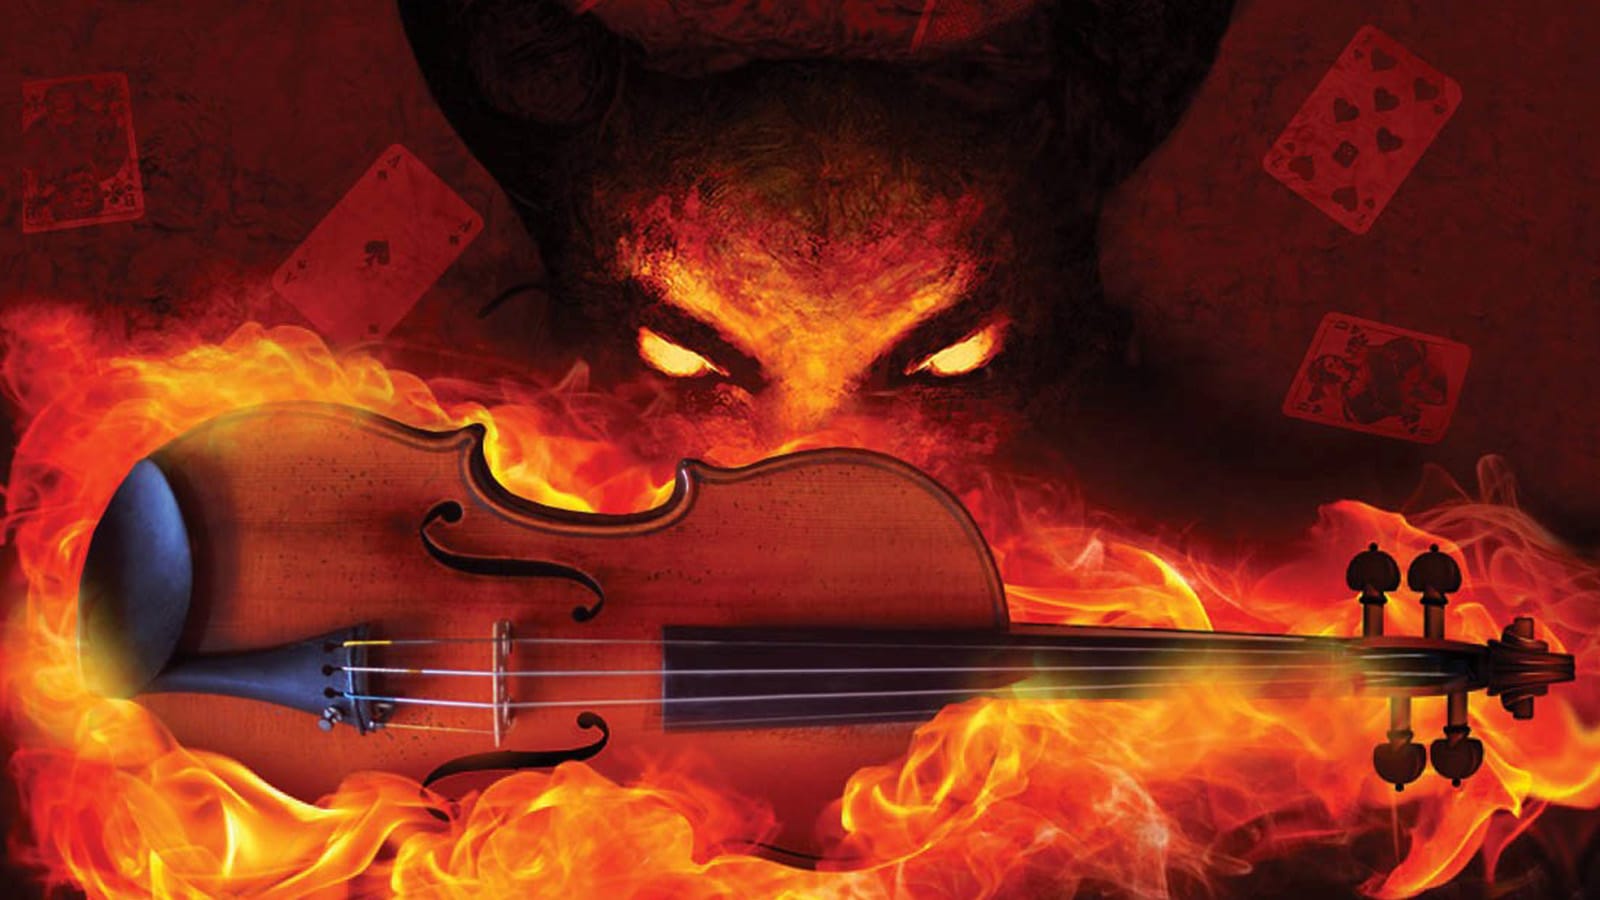 A devil looks over a burning fiddle